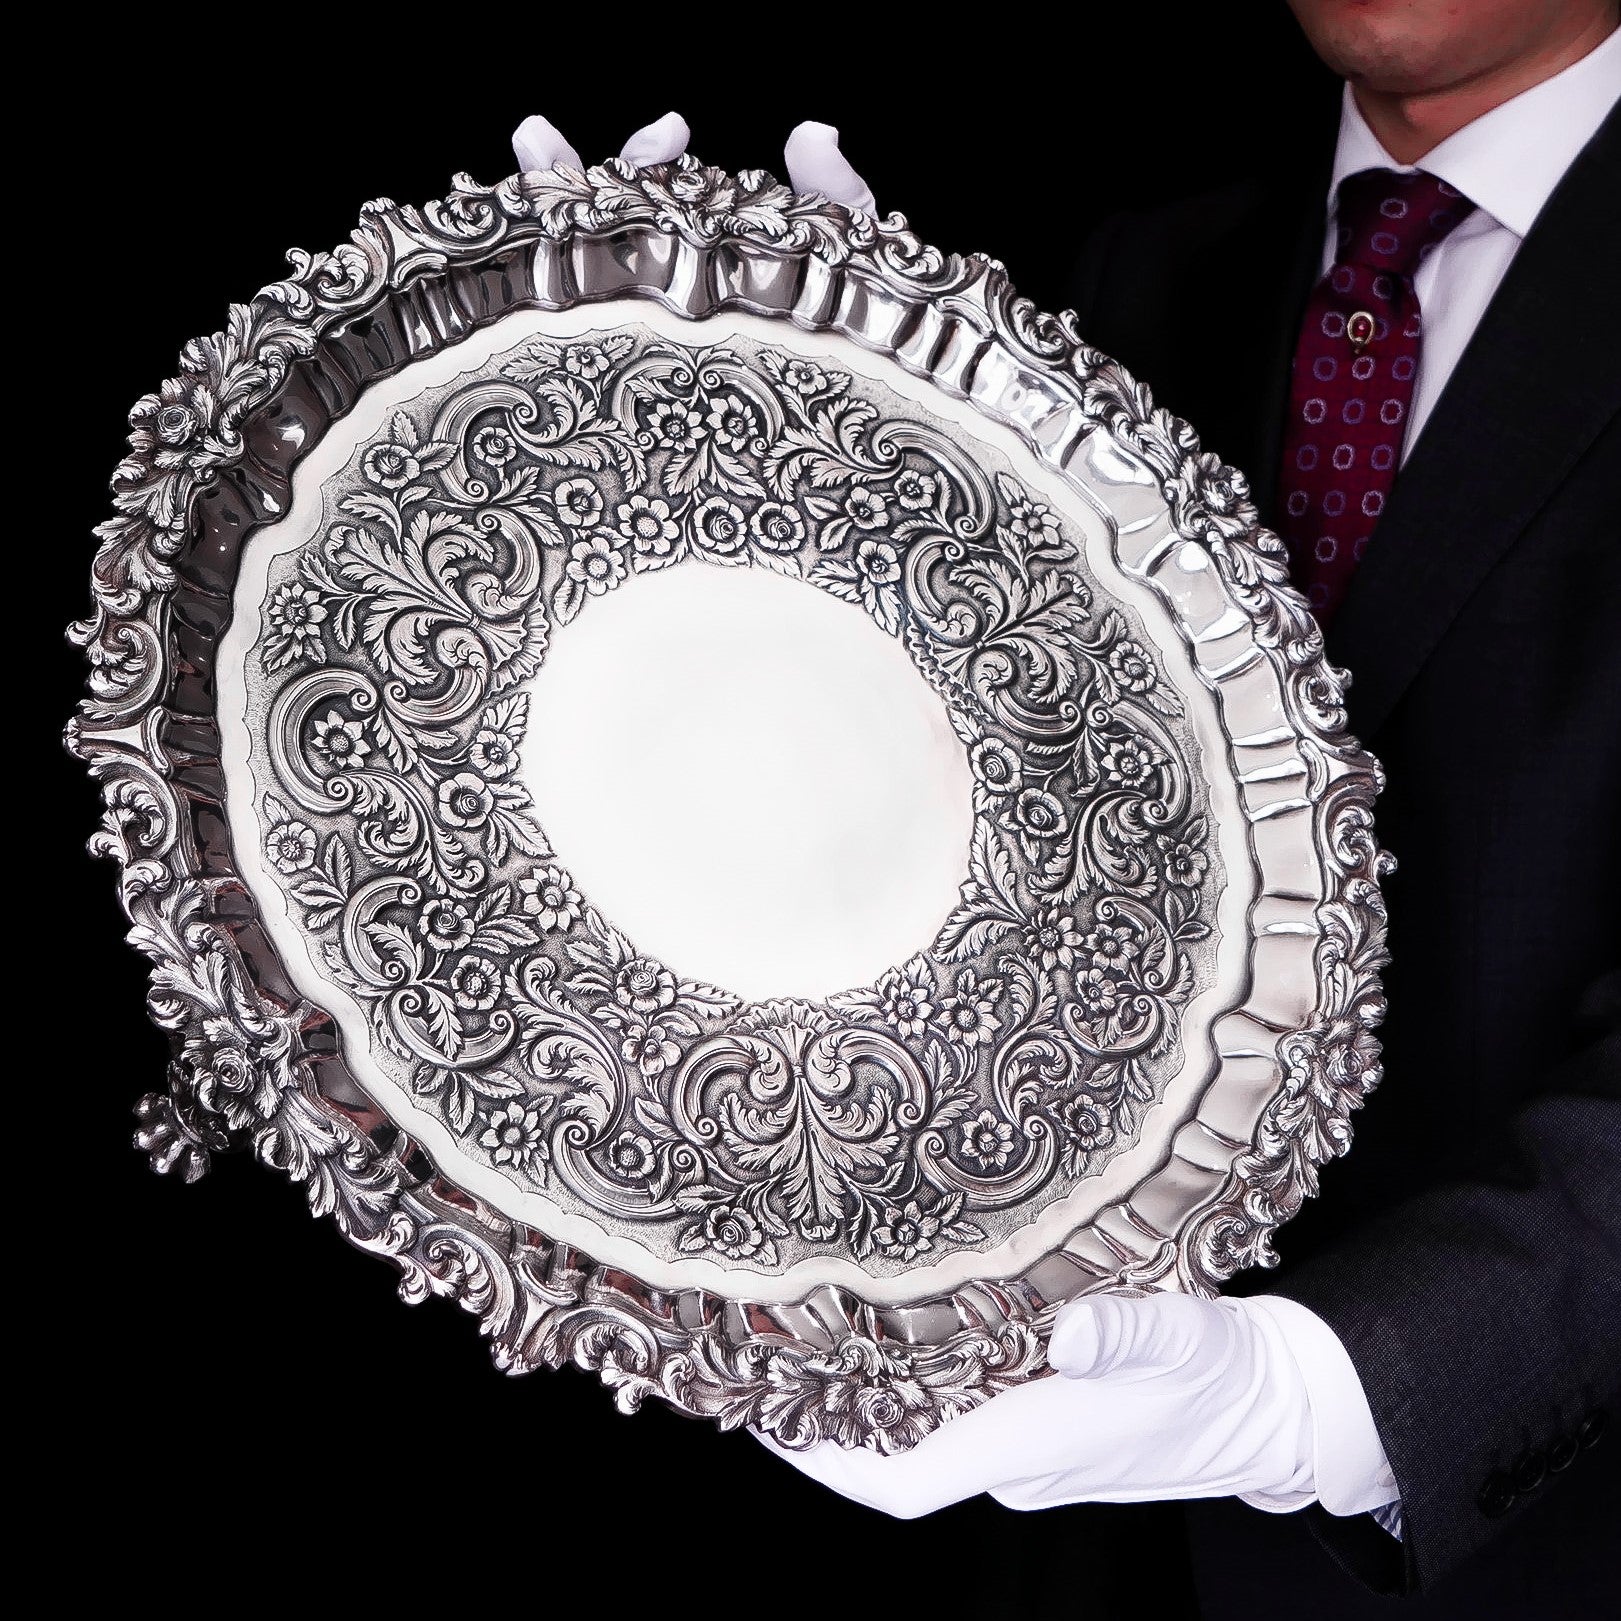 We are delighted to offer this magnificent Georgian solid silver Irish tray/footed salver with the marks of Robert W Smith, Dublin 1831.
 
This salver presents an array of exemplary and absolutely delightful features, distinctly Irish and profusely